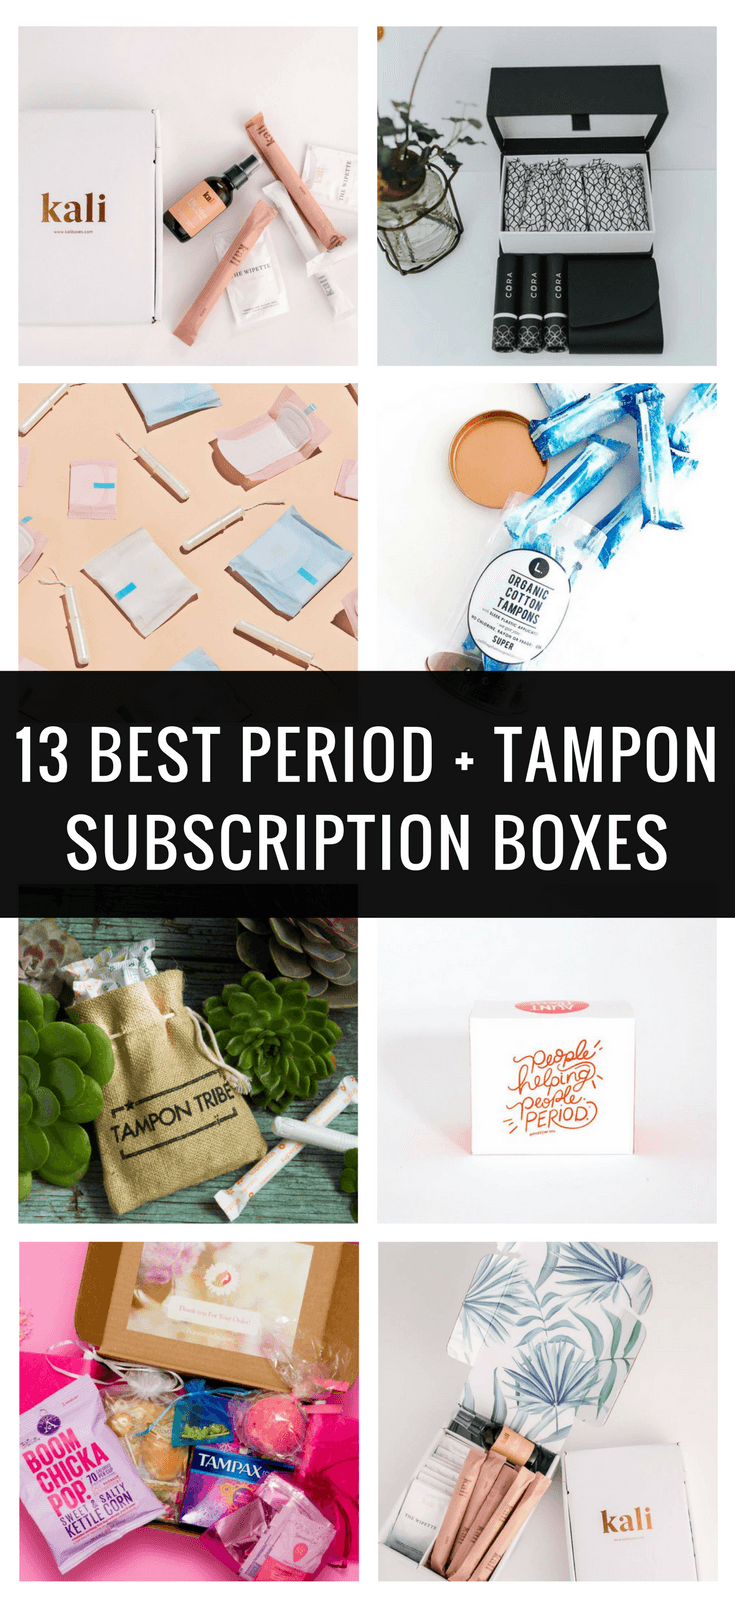 LOLA Tampon Subscription Boxes